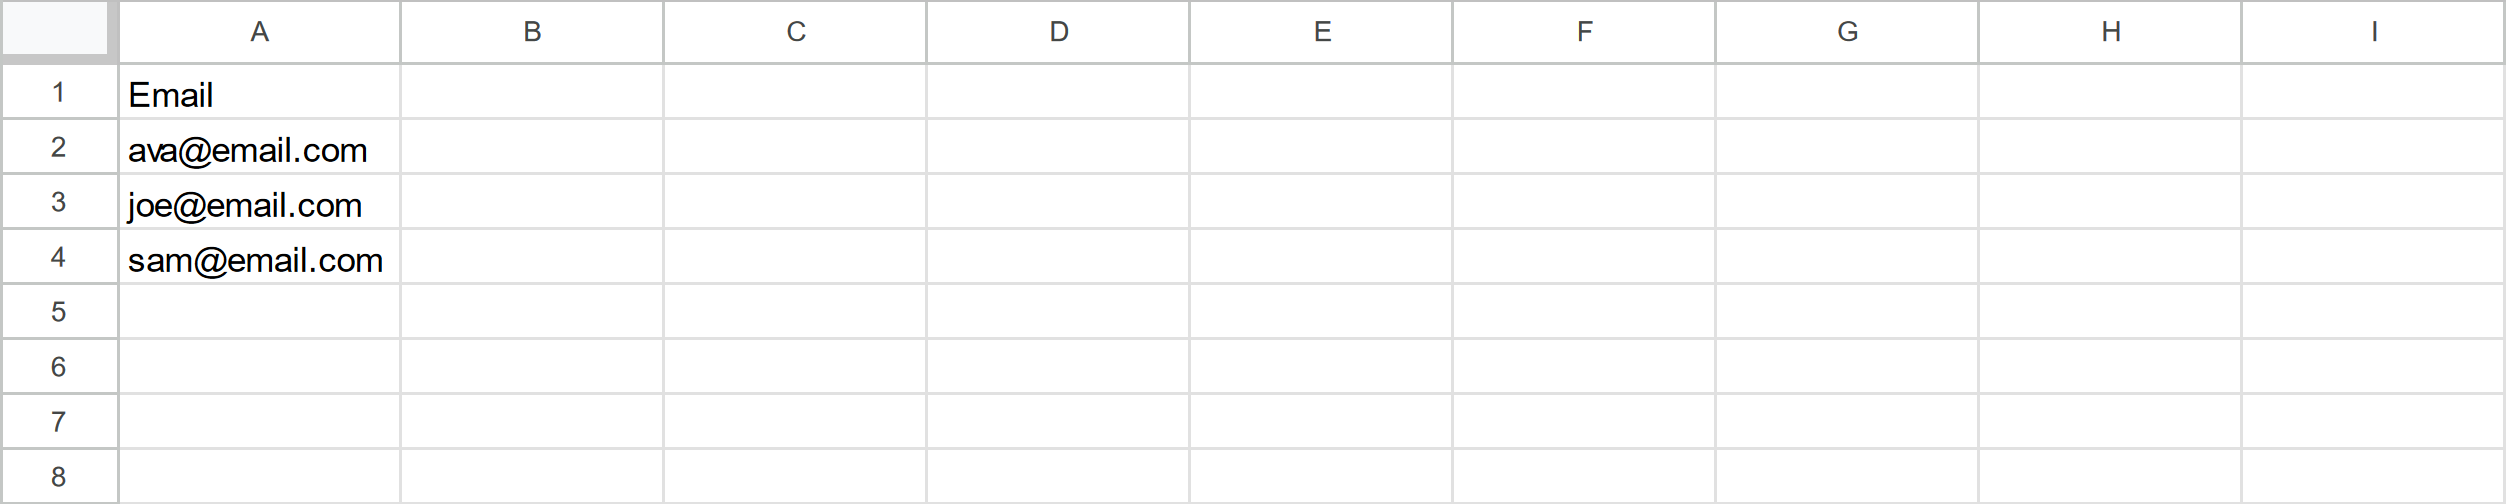 Email addresses added to the first column of the spreadsheet, under the header "Email"